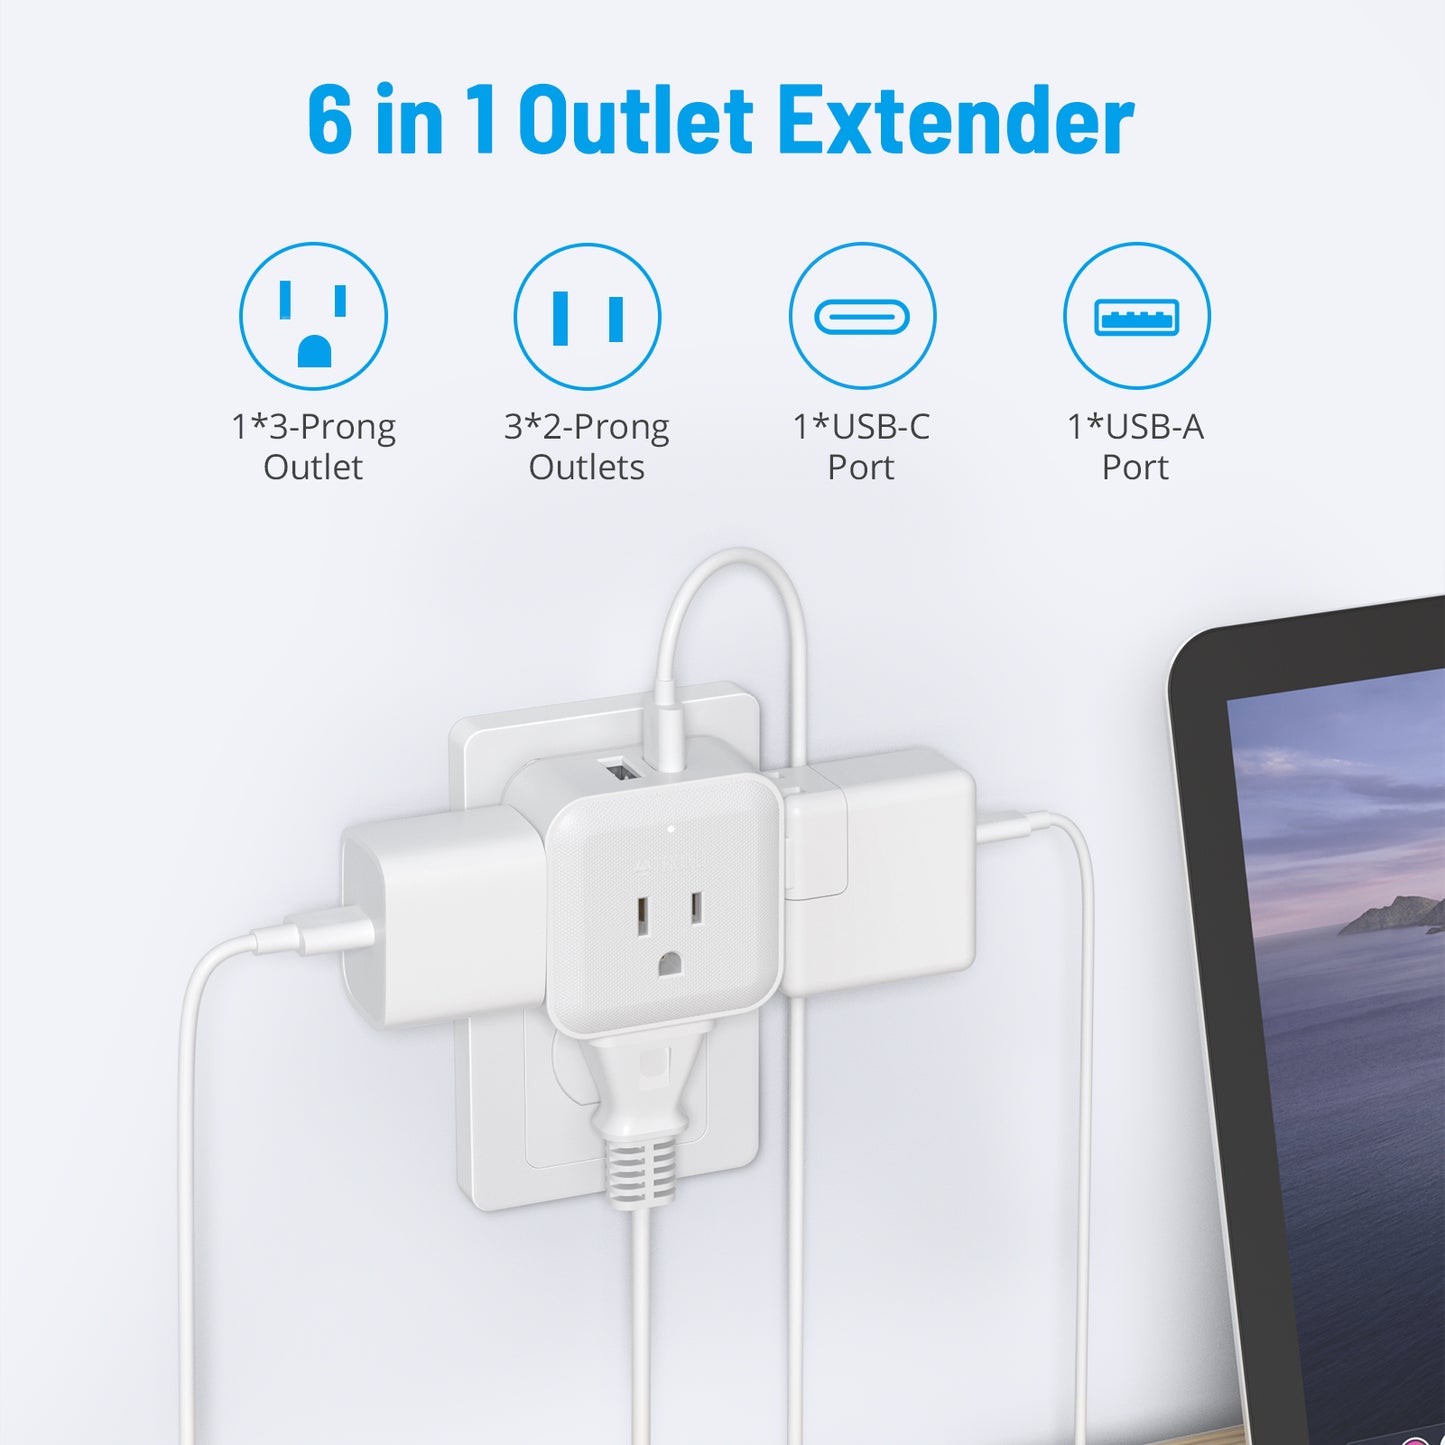  TROND Multi Plug Outlet Extender 2 Pack - Electrical Wall Outlet  Splitter, 3 Way Outlet Wall Adapter, Cruise Essentials, Small Multiple Plug  Expander for Cruise Ship Home Office Dorm Room 